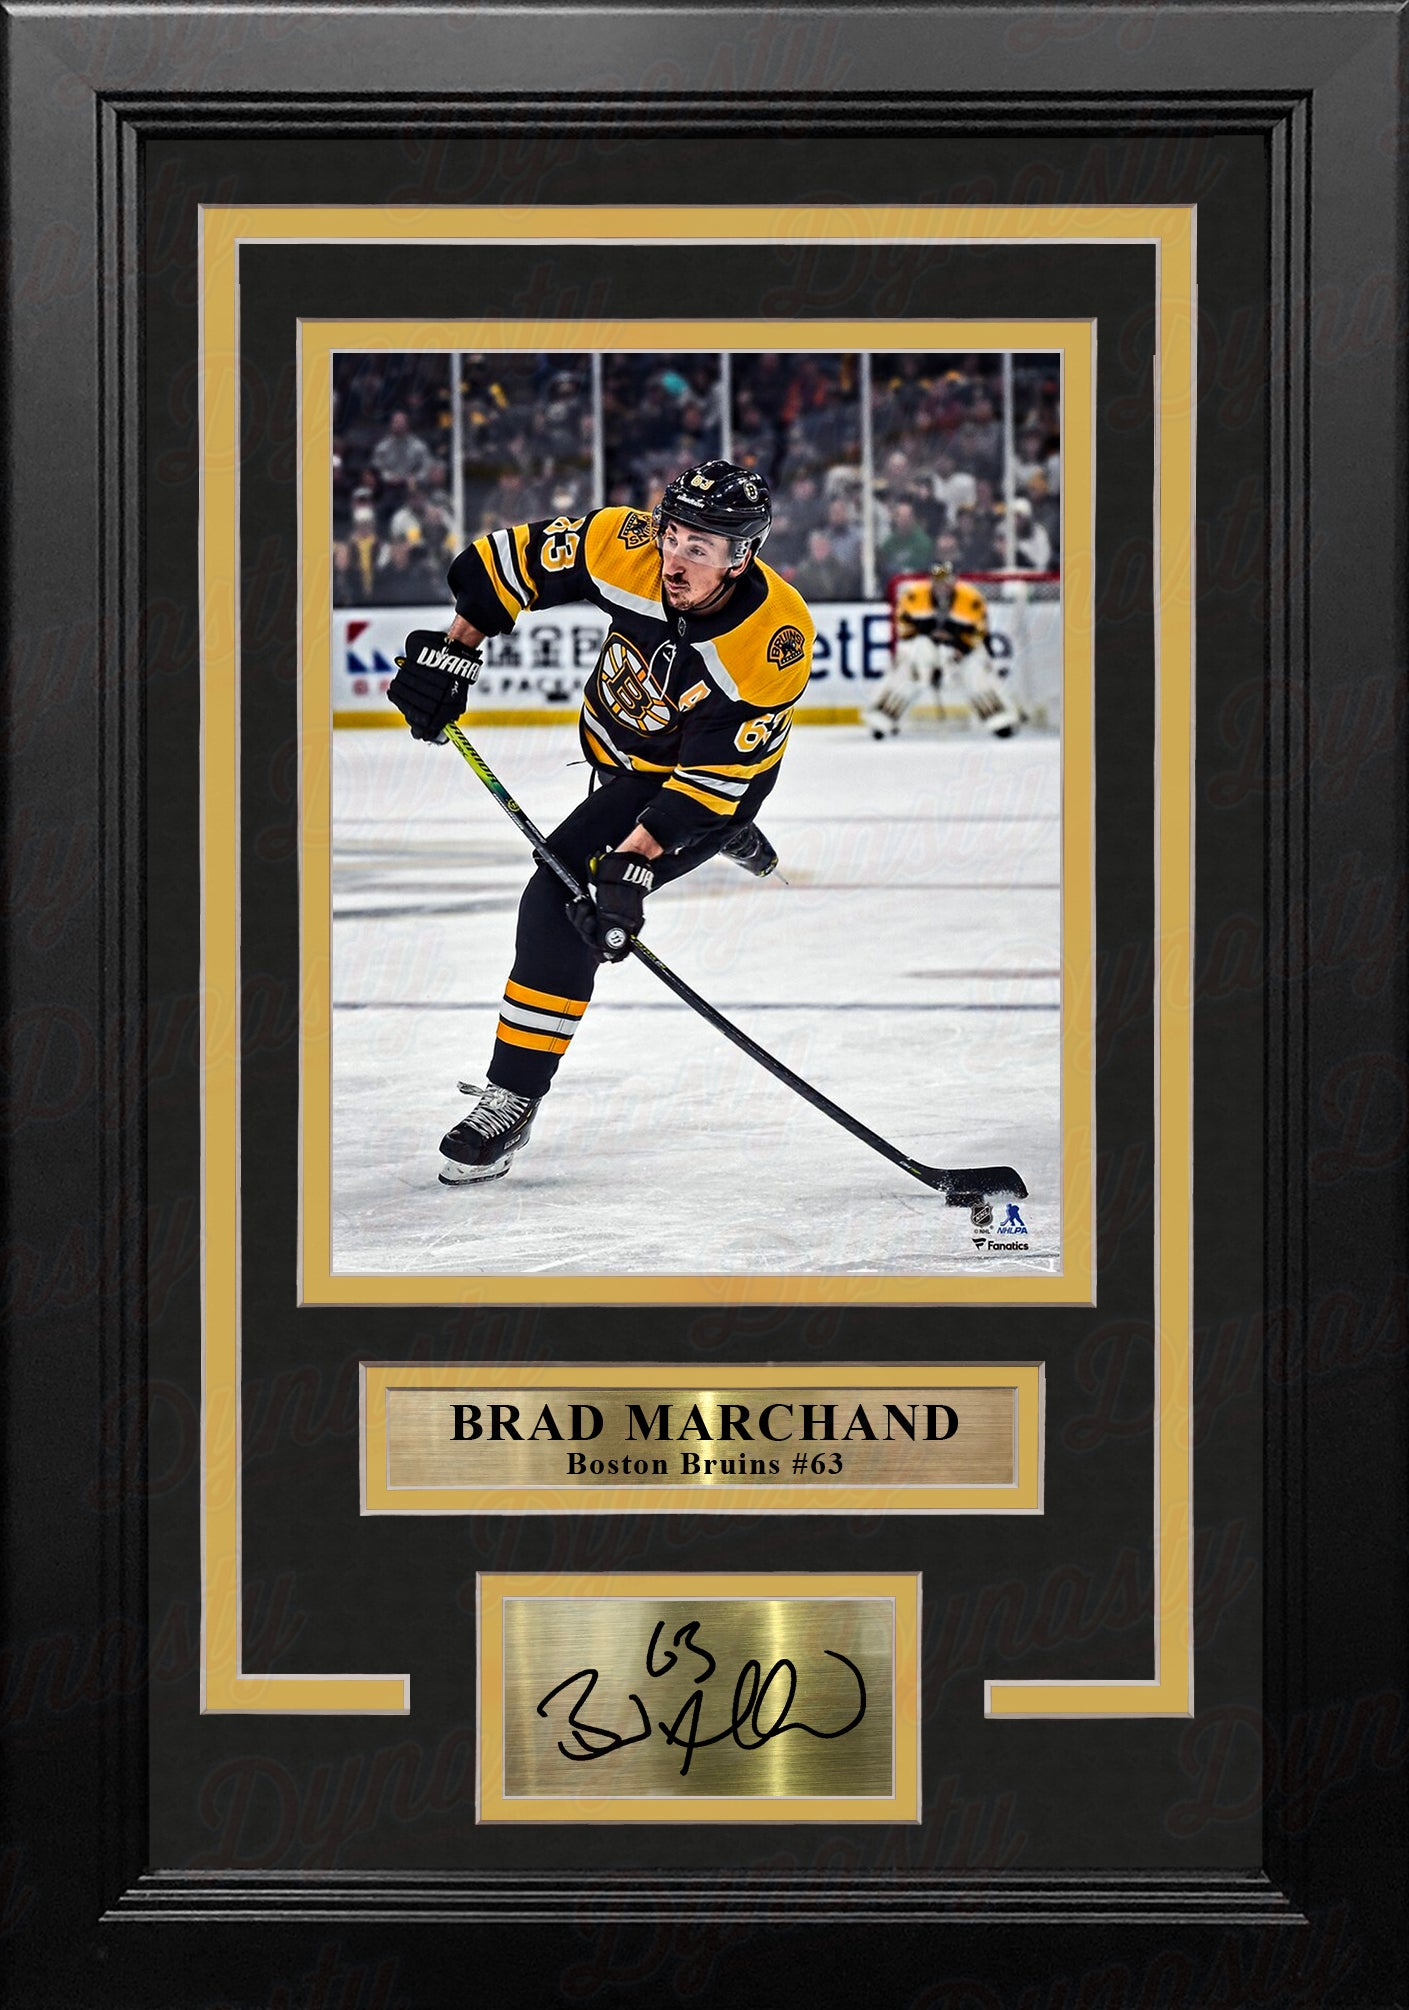 Brad Marchand signed autograph Boston Bruins jersey